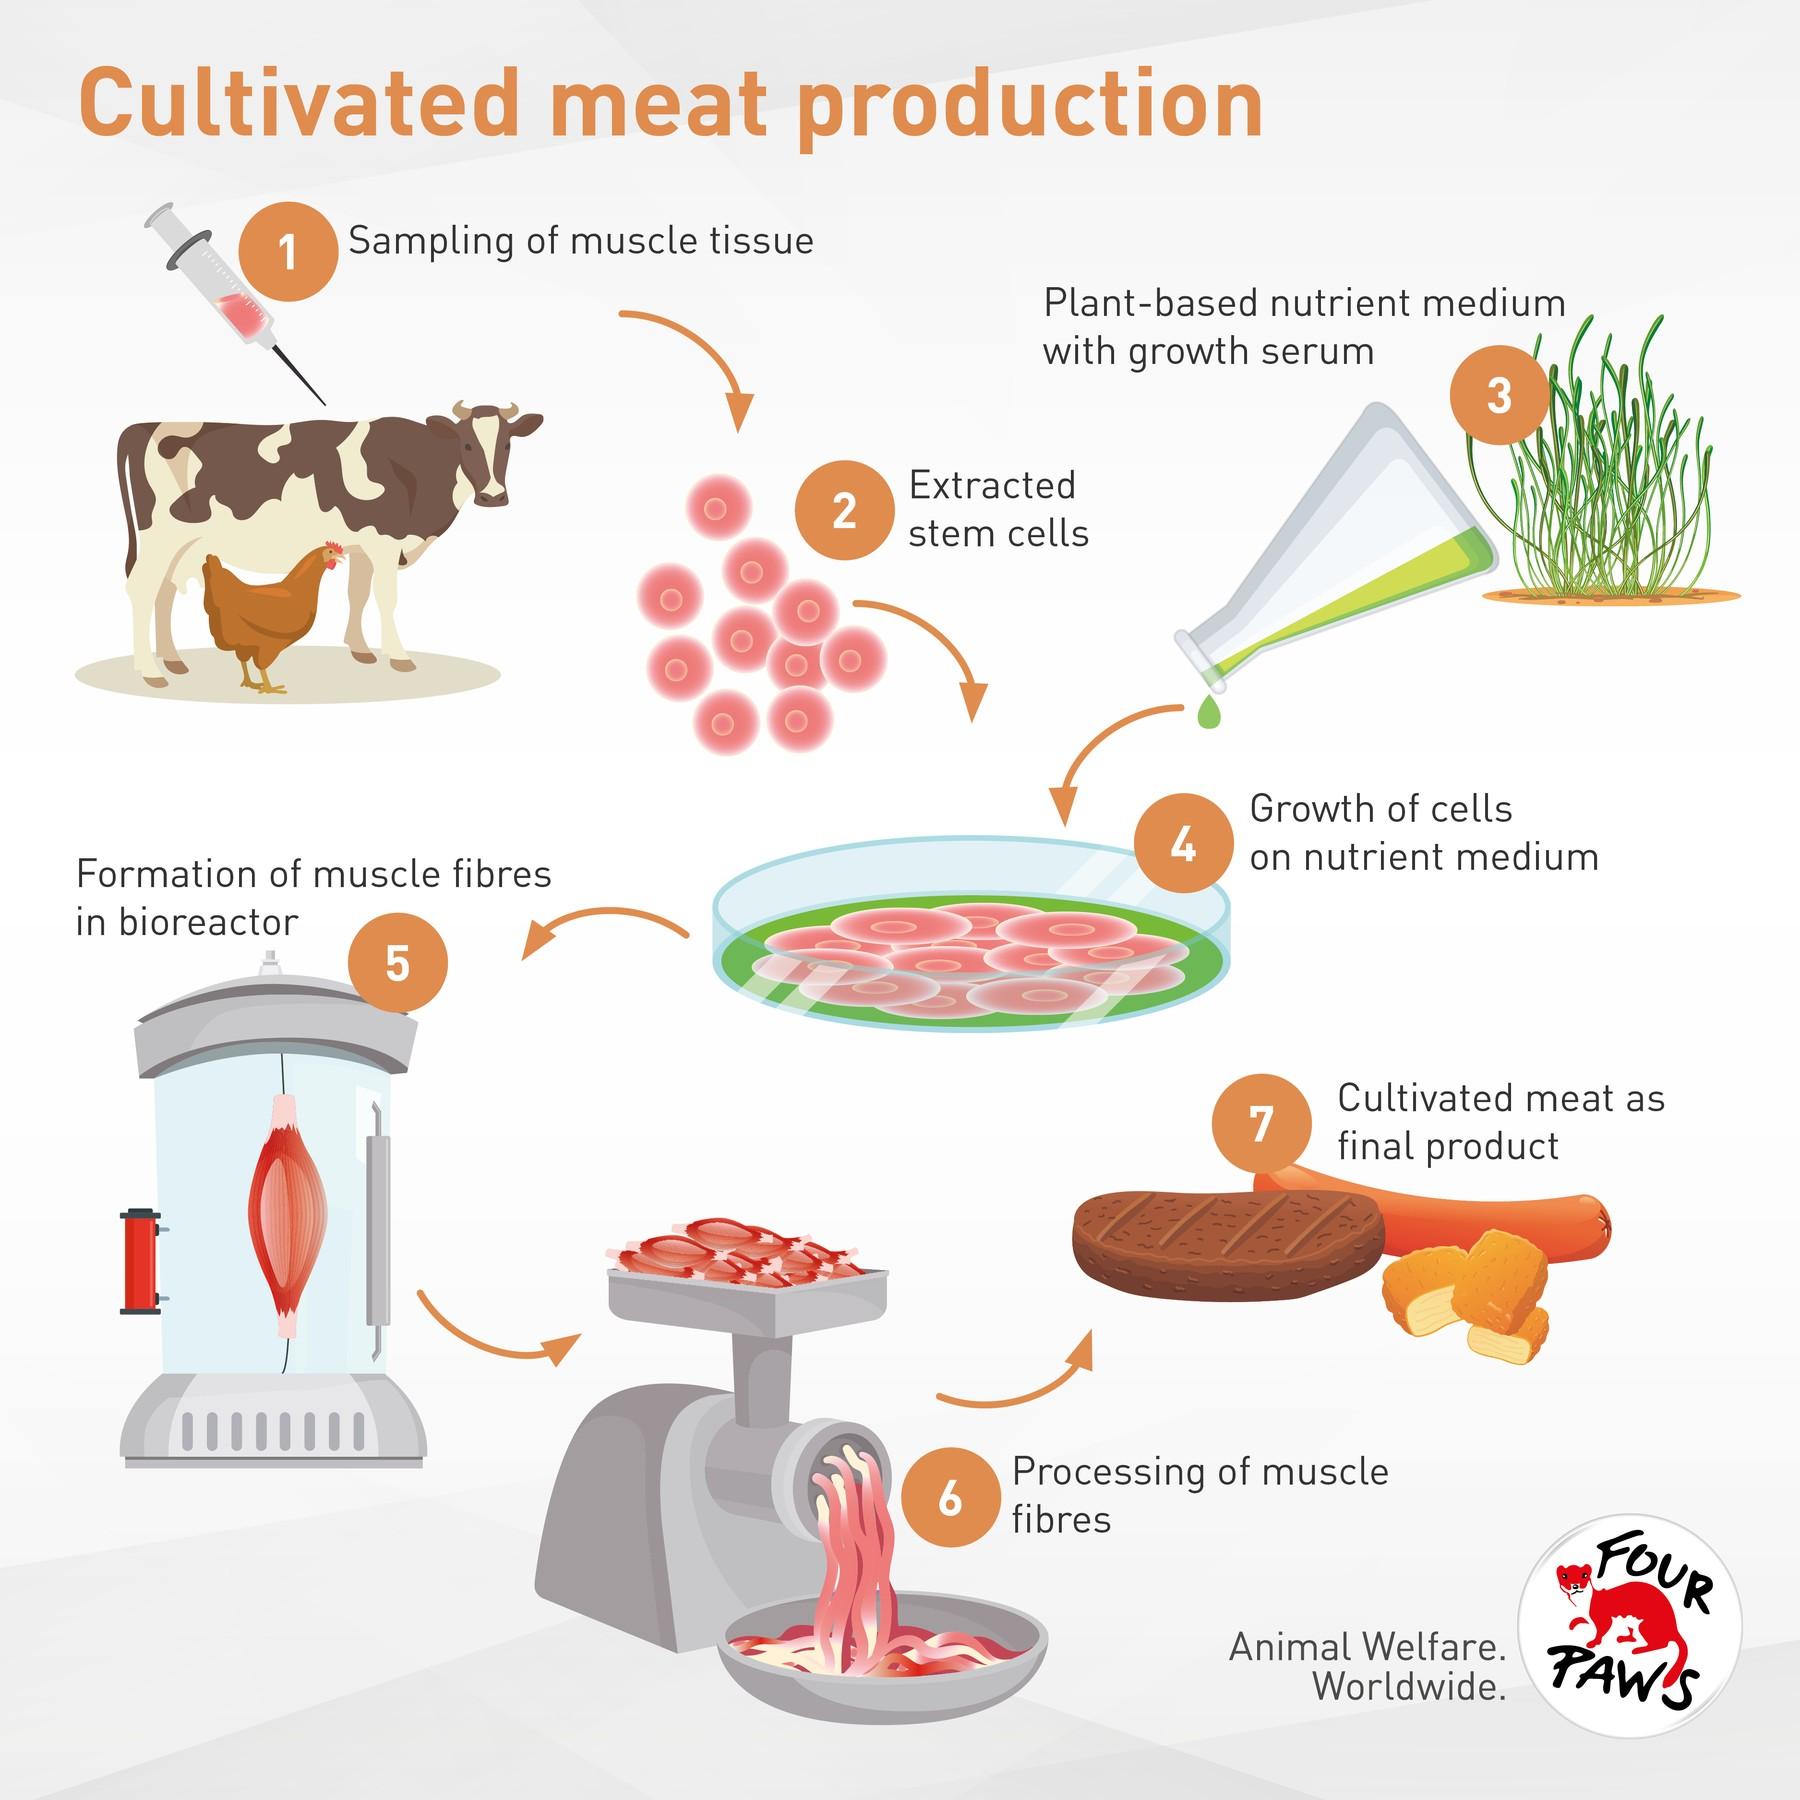 The current state of cultivated meat